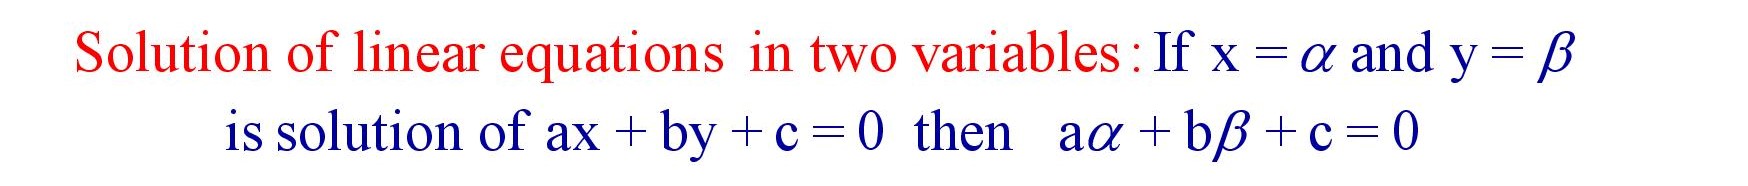 Solution of linear equations in two variables